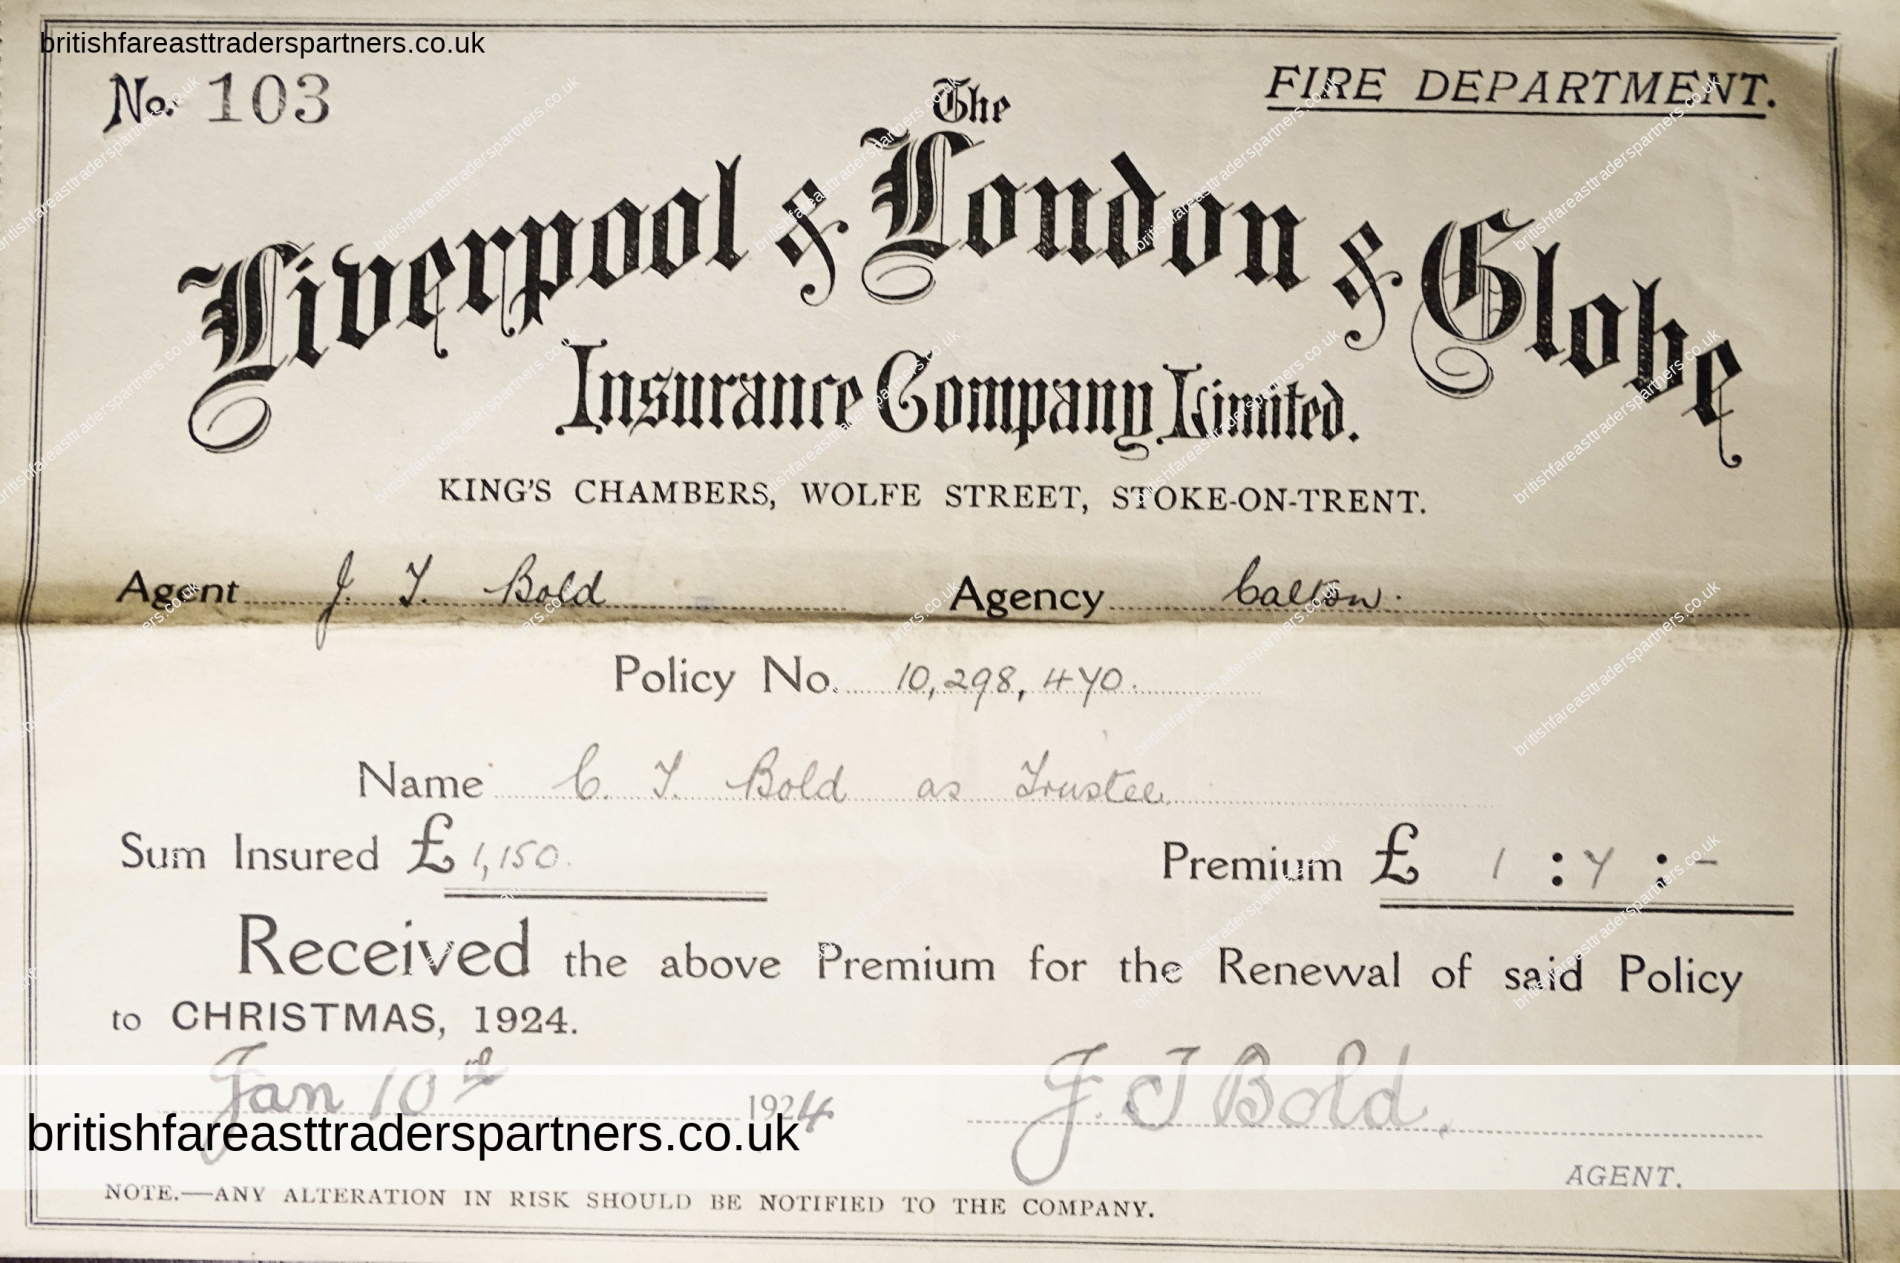 VINTAGE 10th JANUARY 1924 Liverpool & London & Globe INSURANCE COMPANY LIMITED FIRE DEPARTMENT Receipt / Certificate COLLECTABLE EPHEMERA